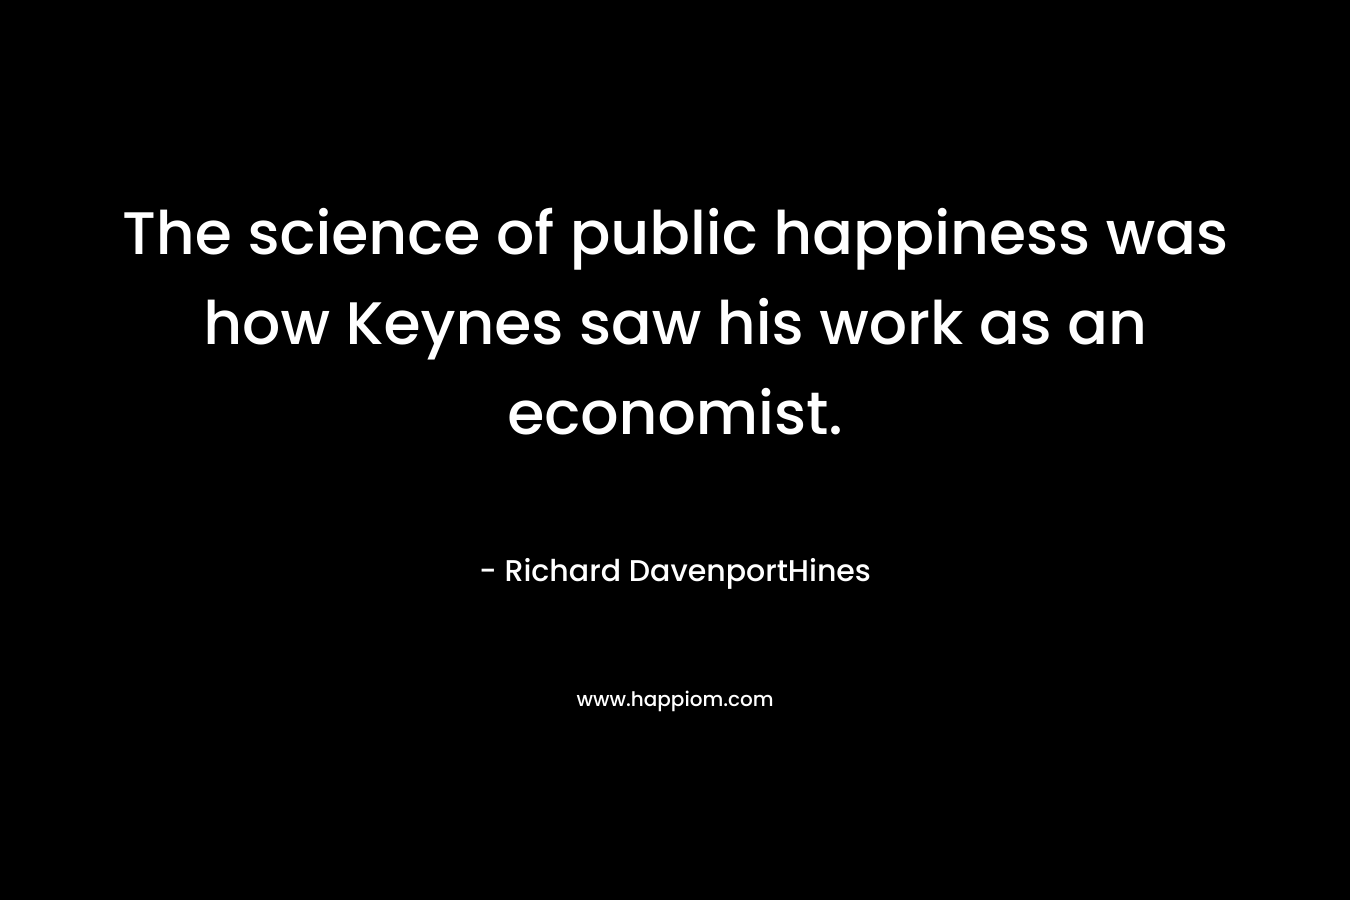 The science of public happiness was how Keynes saw his work as an economist.